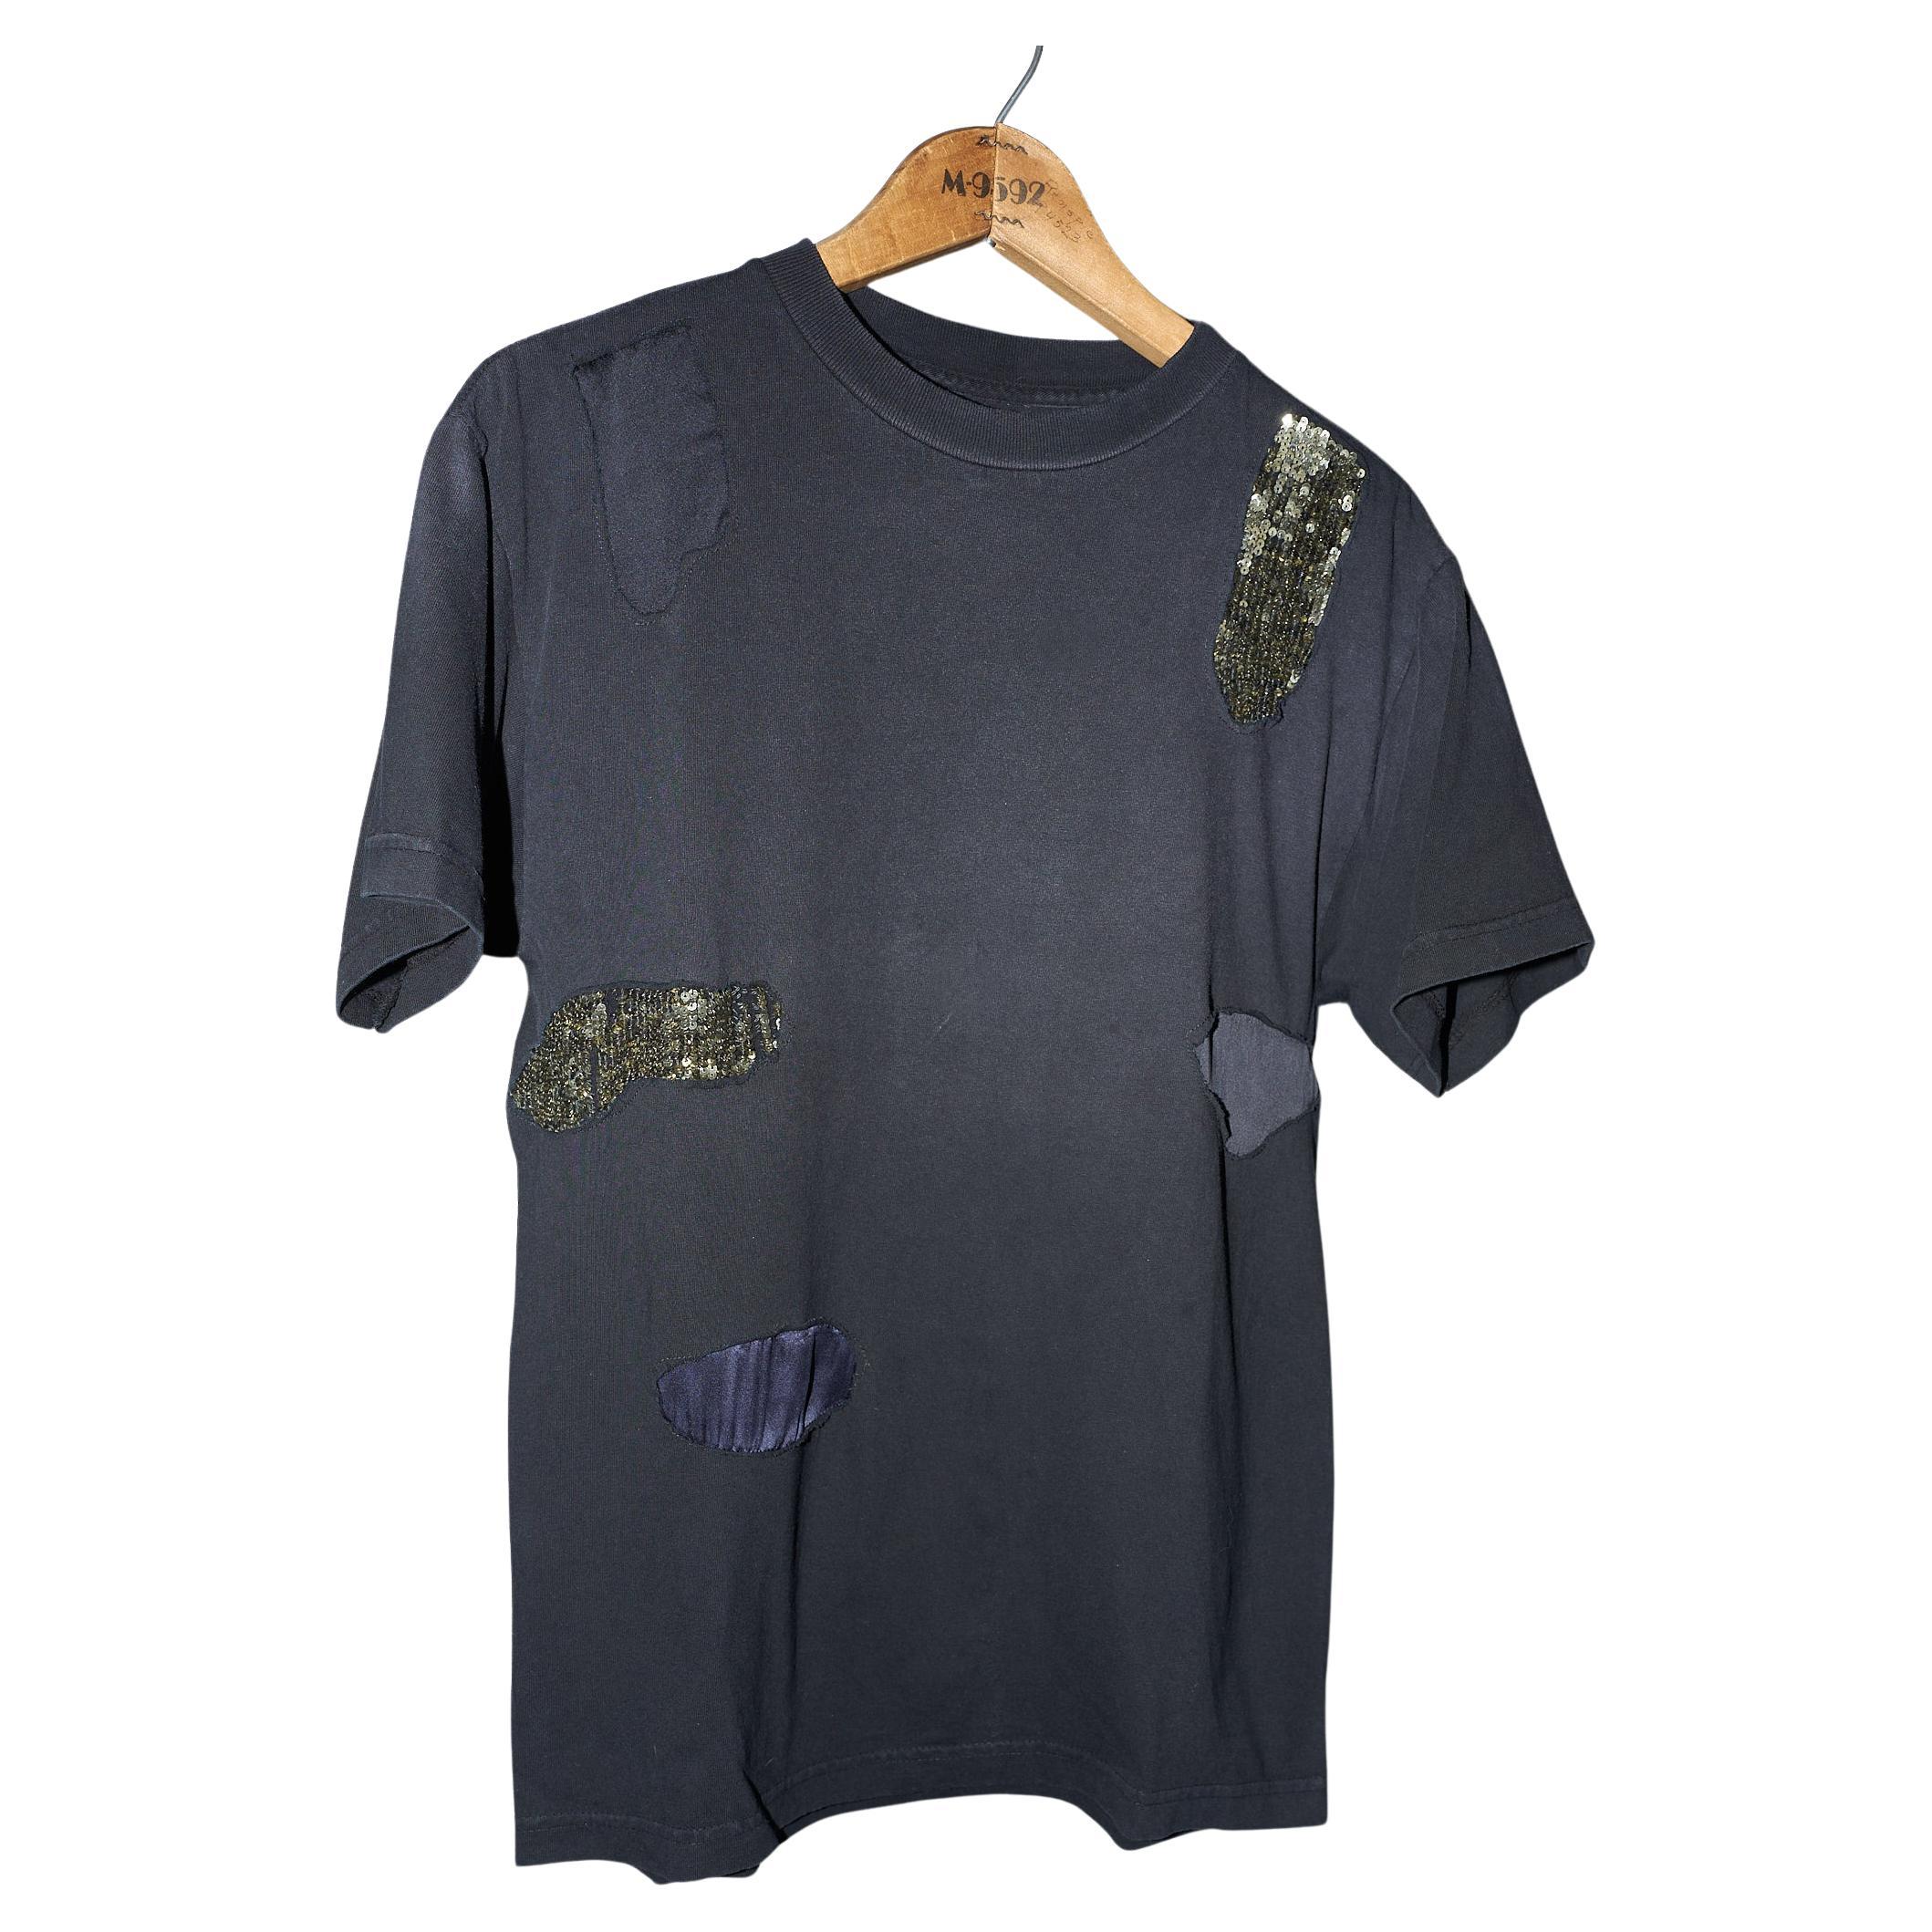 J Dauphin Distressed Black T-Shirt Embellished  Patch Work Sequin Silk Body 100% Cotton 

SPRING SUMMER 2022

Brand: J Dauphin

Size: Medium or Large

Our unique T-shirts has been embellished with Patch work of Black and midnight Blue 100% Silk and